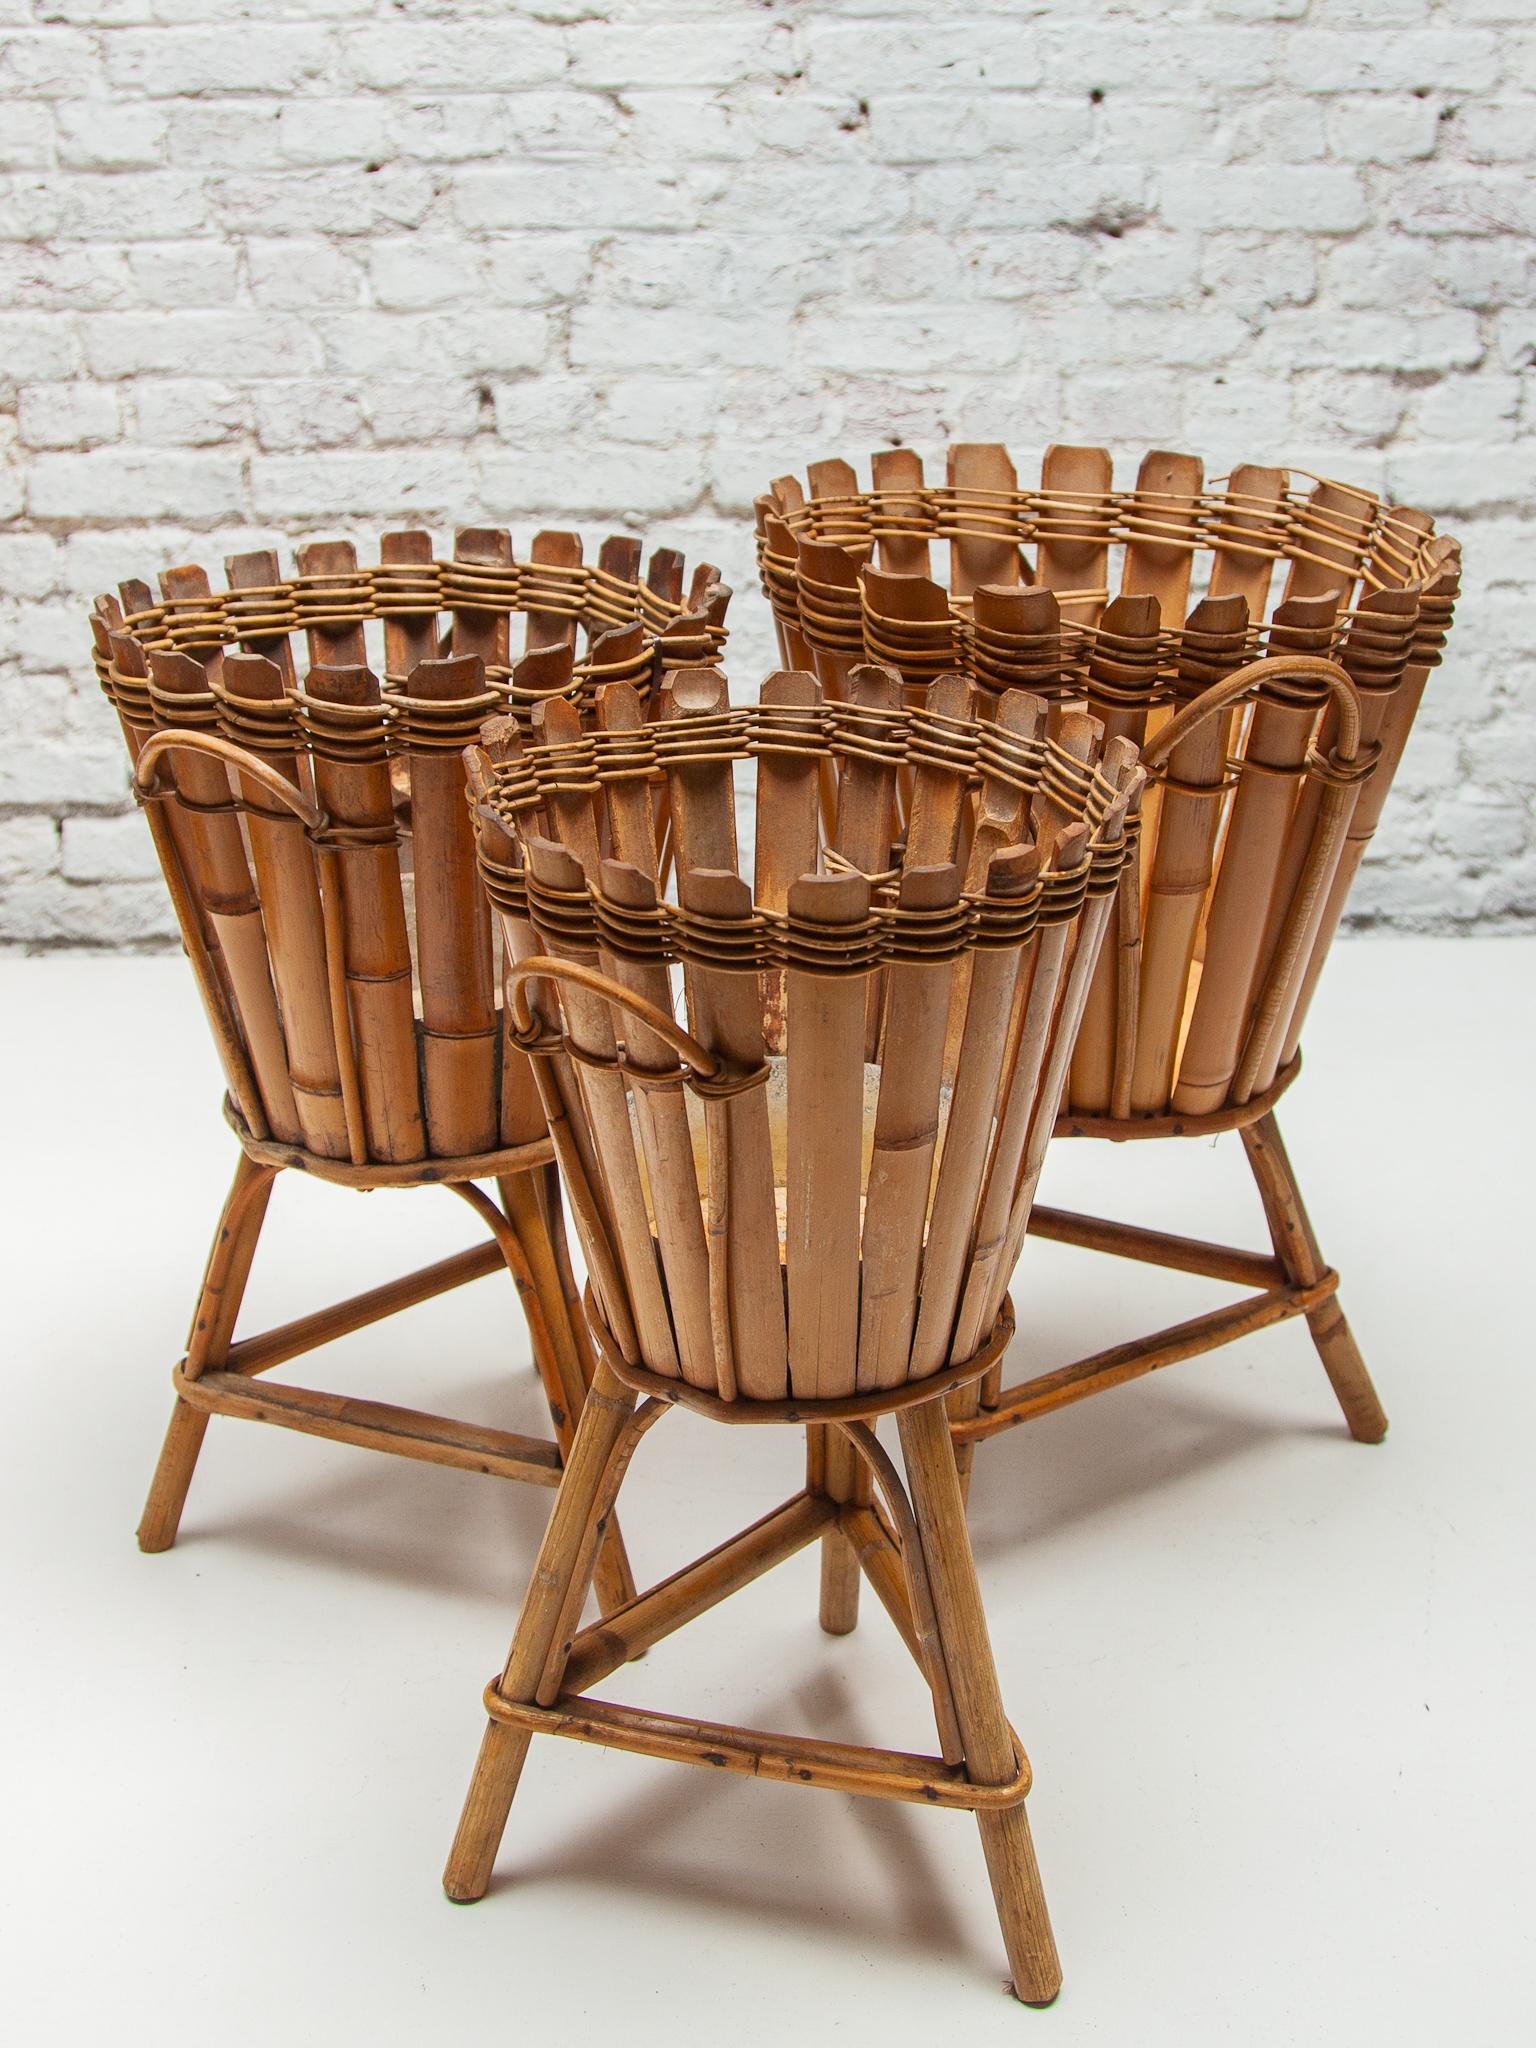 Set of Three Bamboo Stand Planters and Wall Hanging Baskets, Italy, 1950s For Sale 7